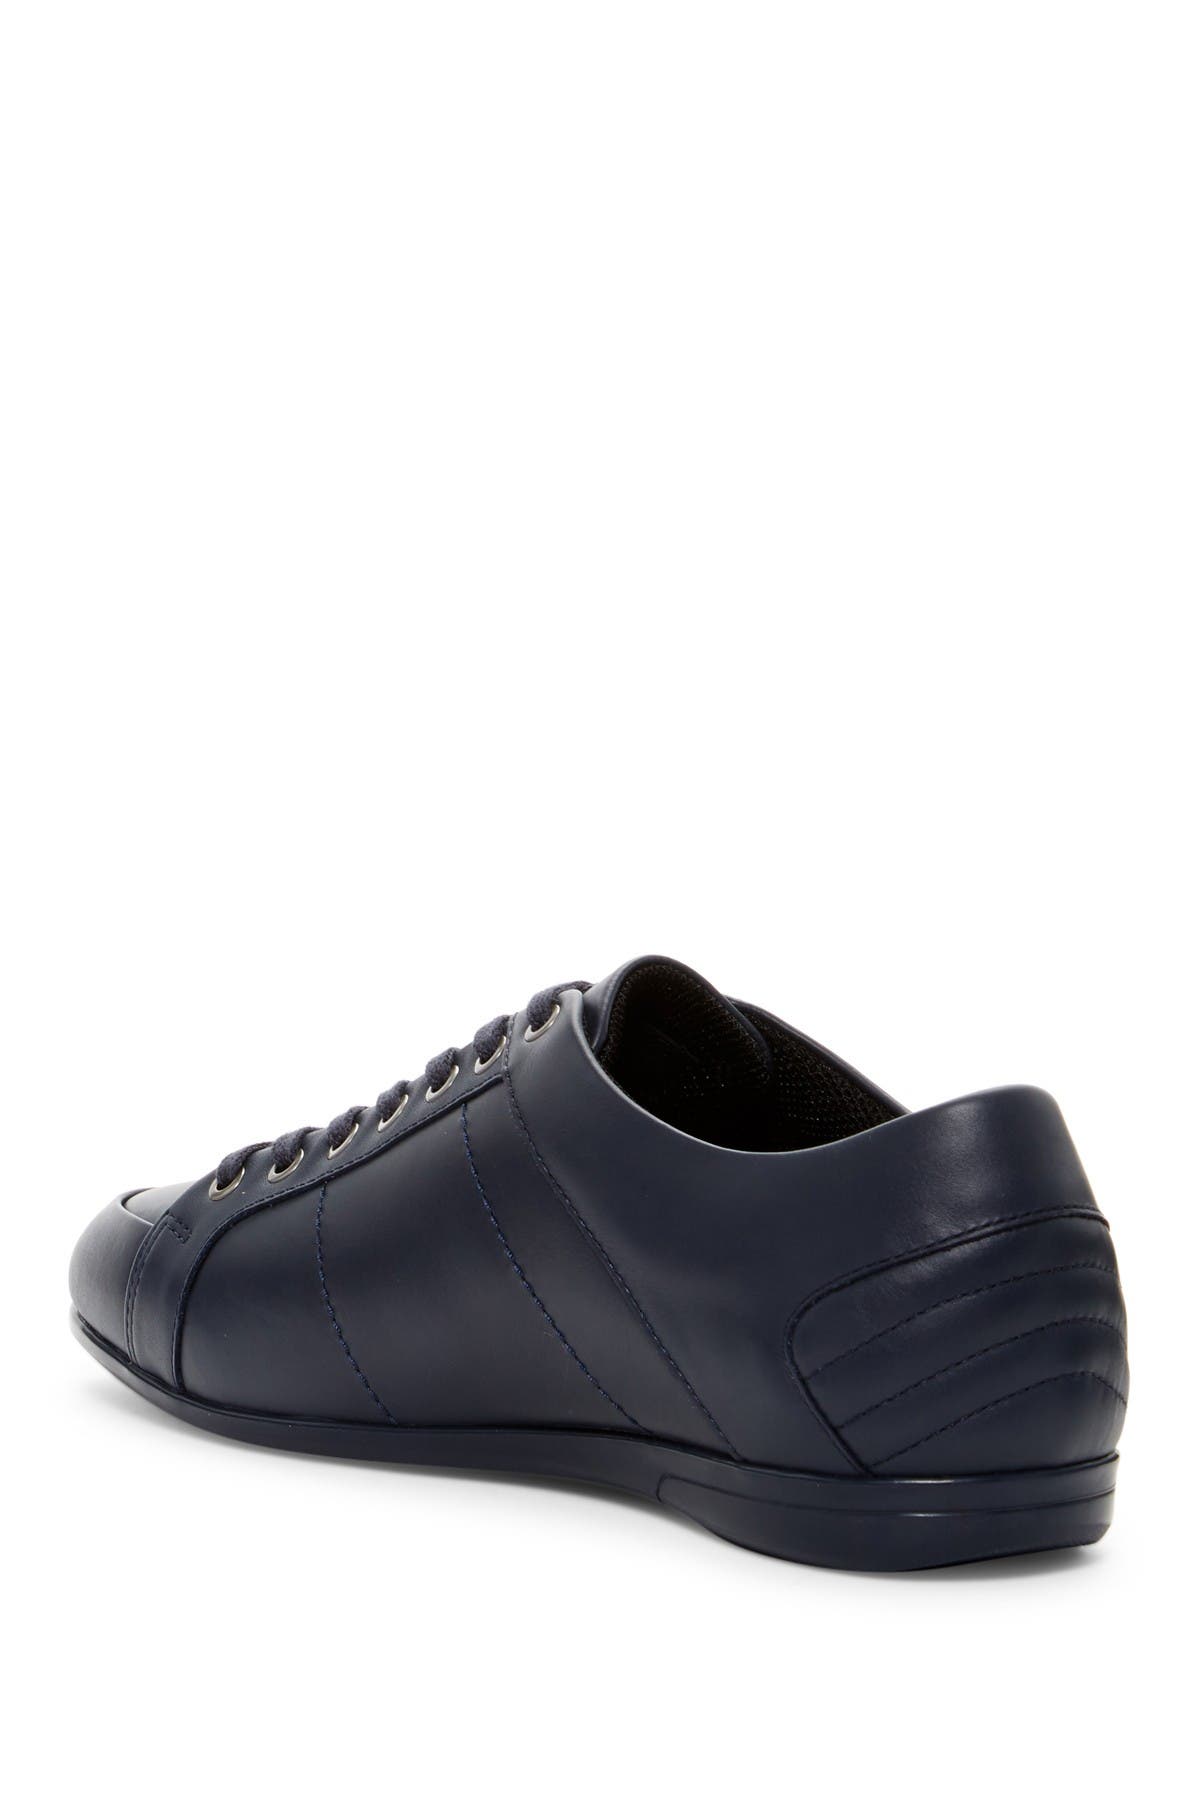 versace collection nappa leather sneaker